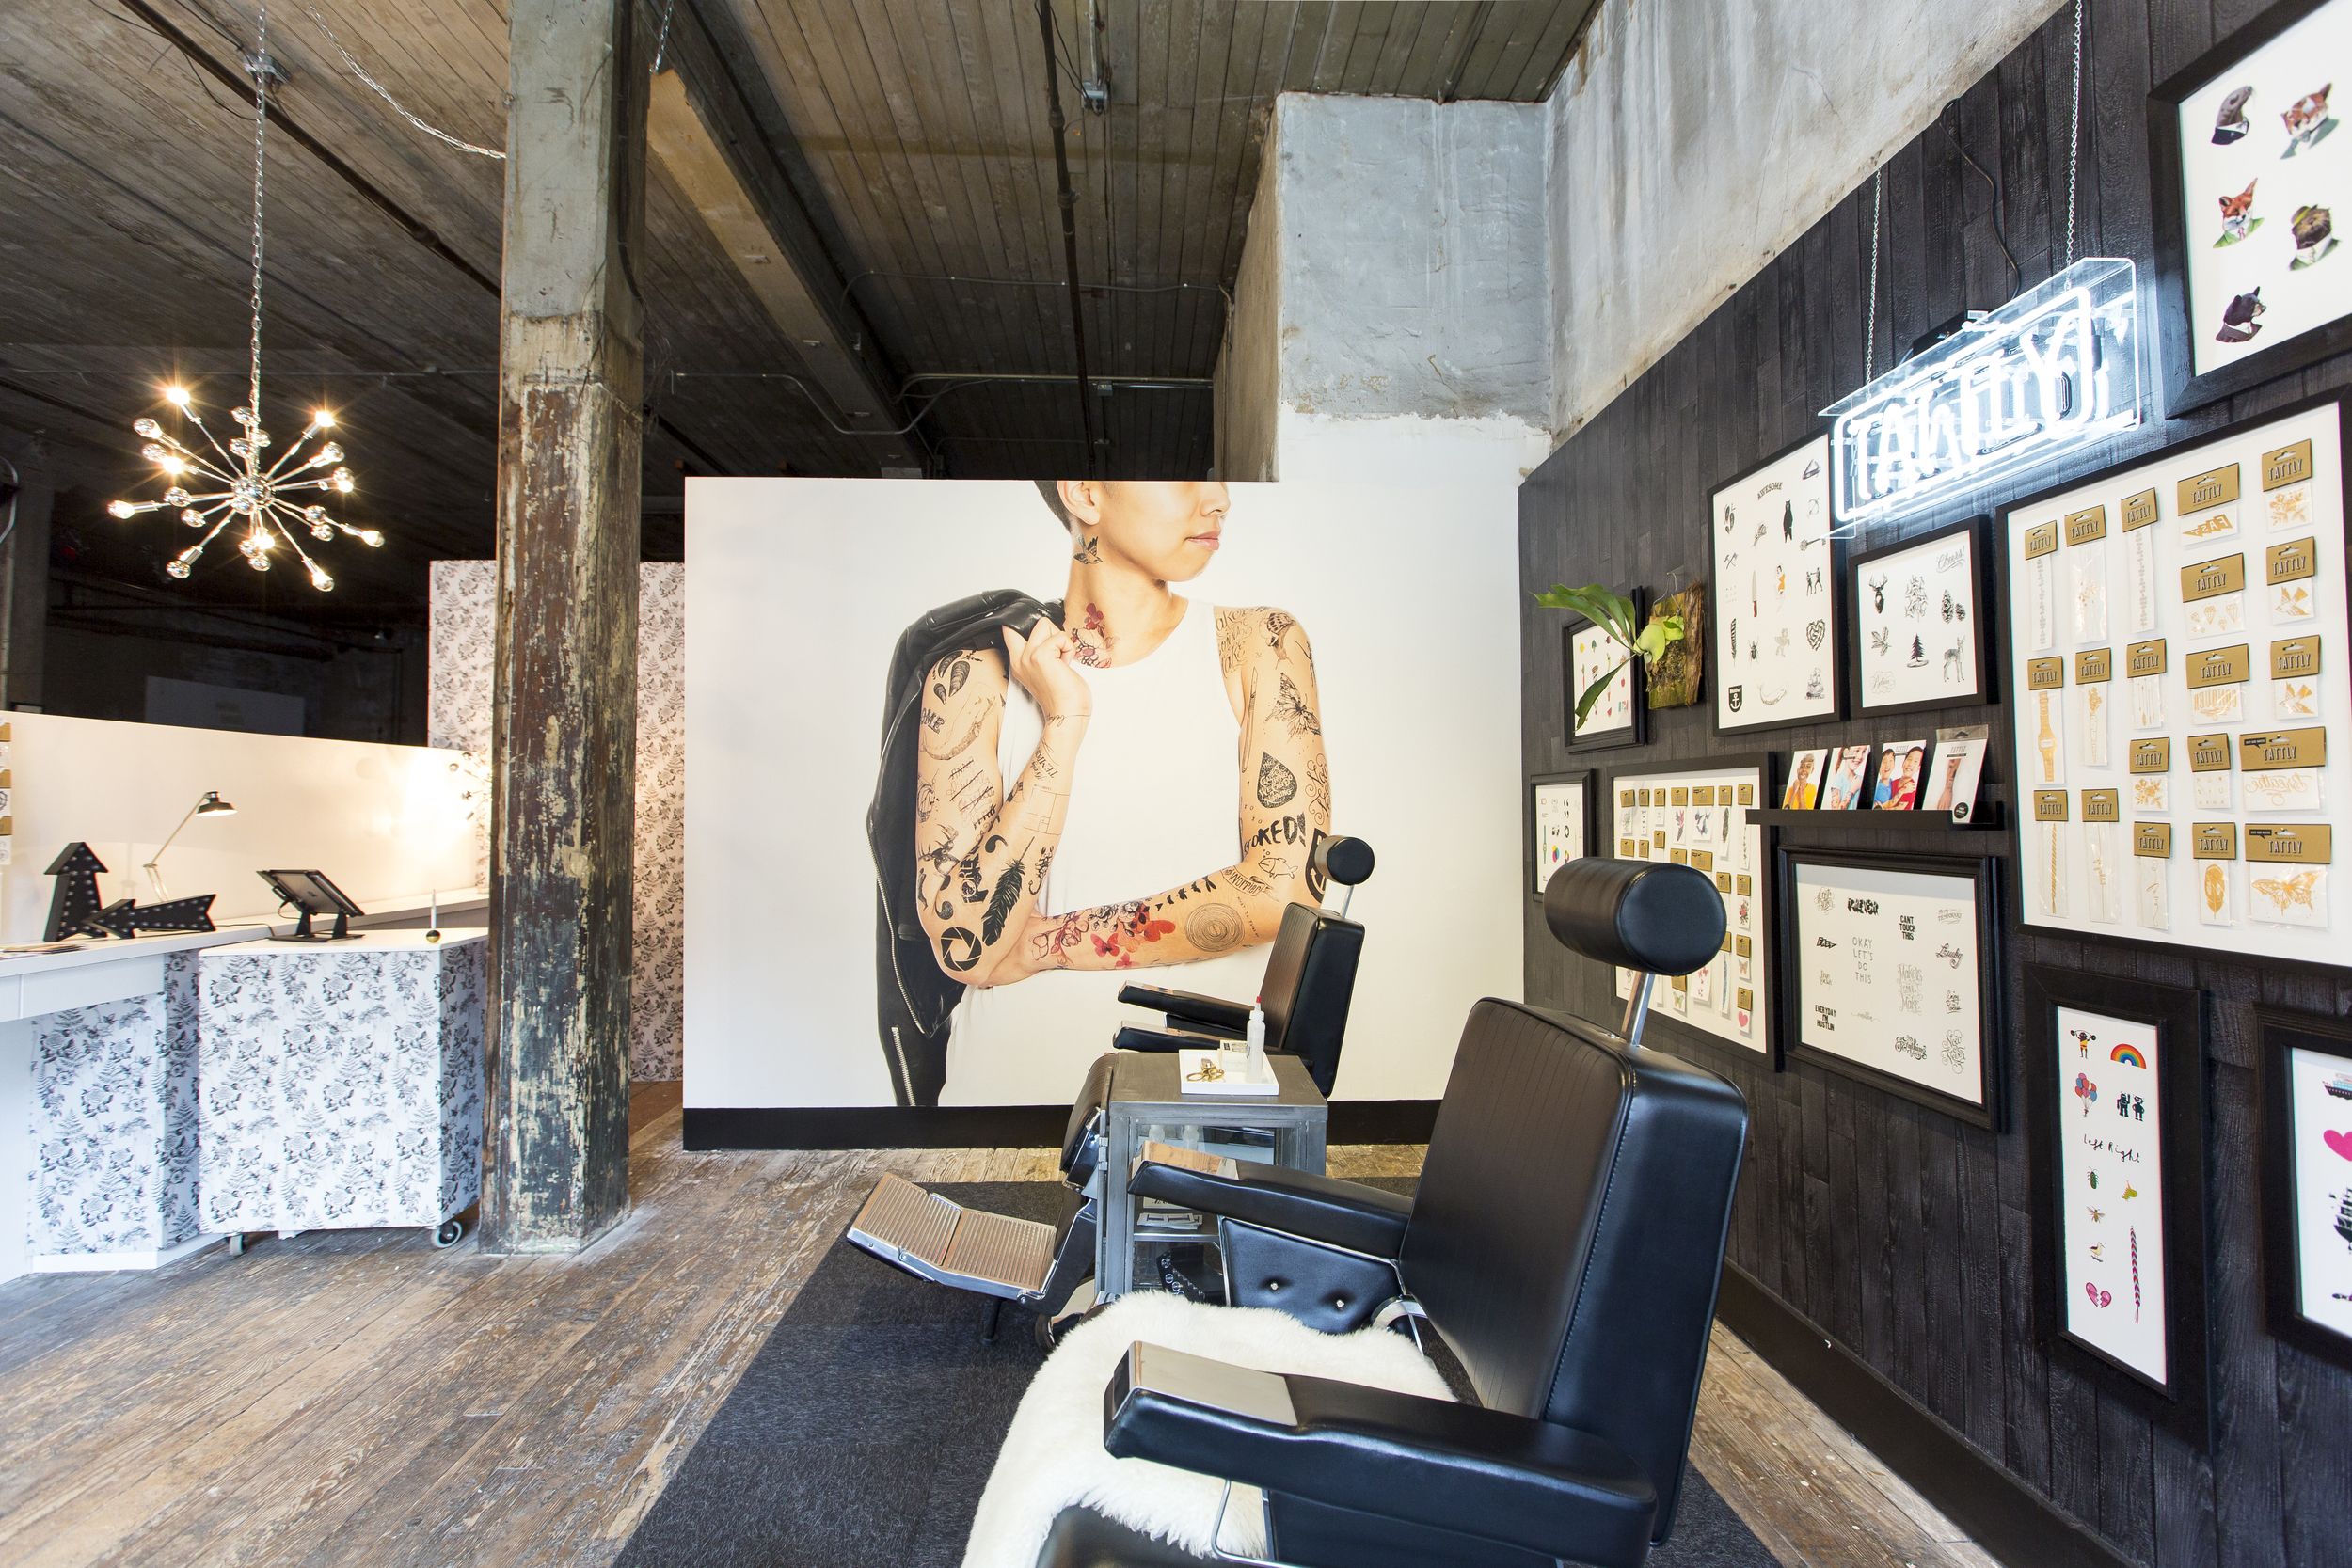 A Full-Service Tattly Temporary Tattoo Parlor Opens in Brooklyn, New York